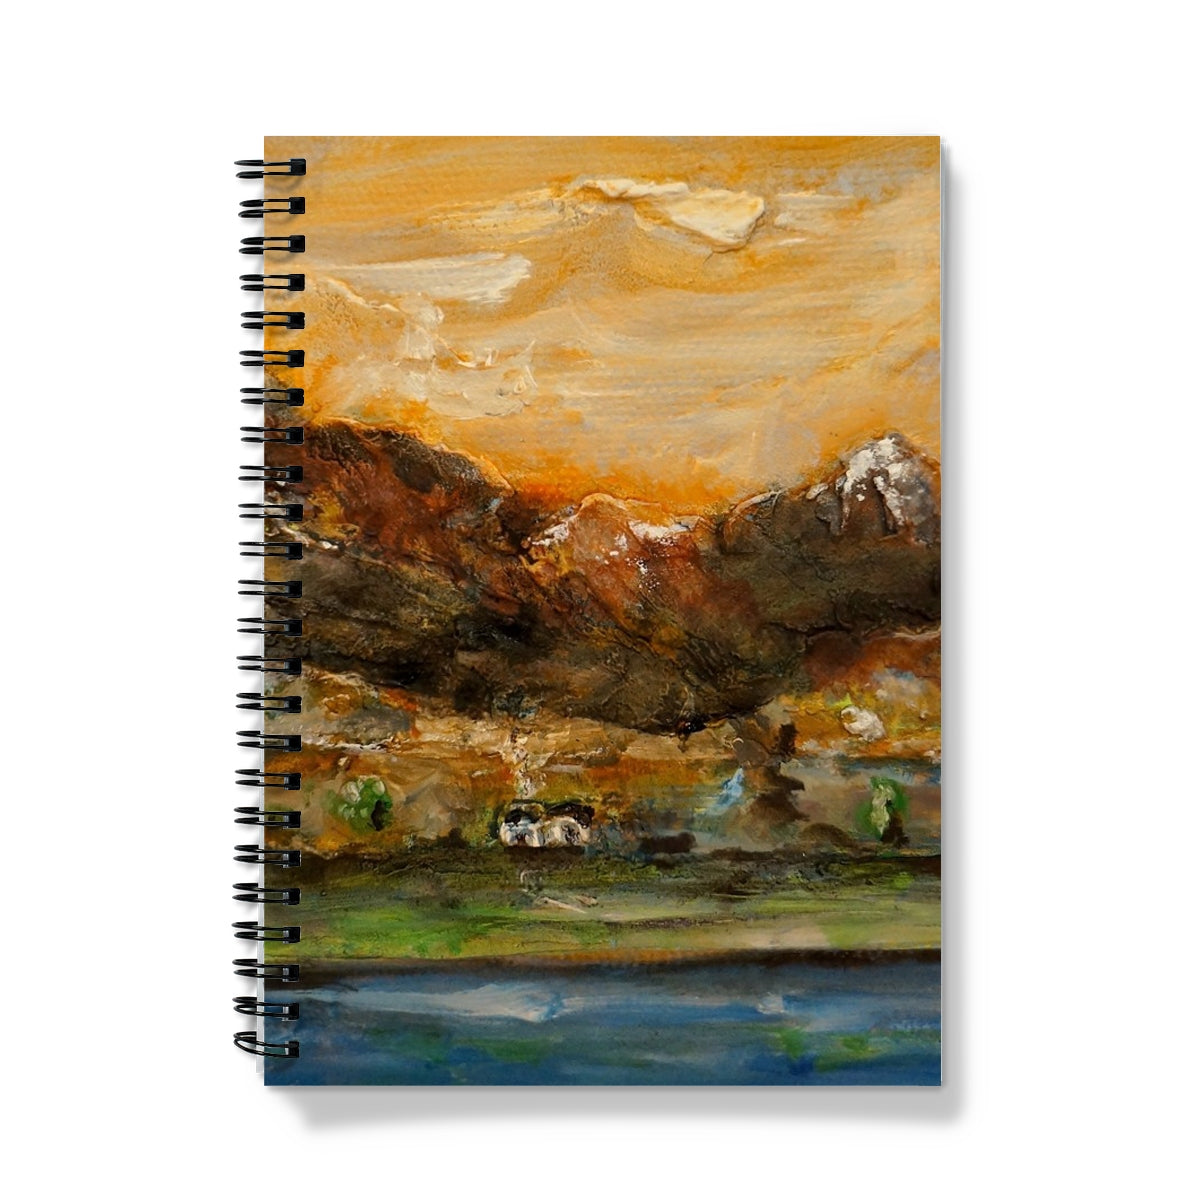 A Glencoe Cottage Art Gifts Notebook-Journals & Notebooks-Glencoe Art Gallery-A4-Graph-Paintings, Prints, Homeware, Art Gifts From Scotland By Scottish Artist Kevin Hunter